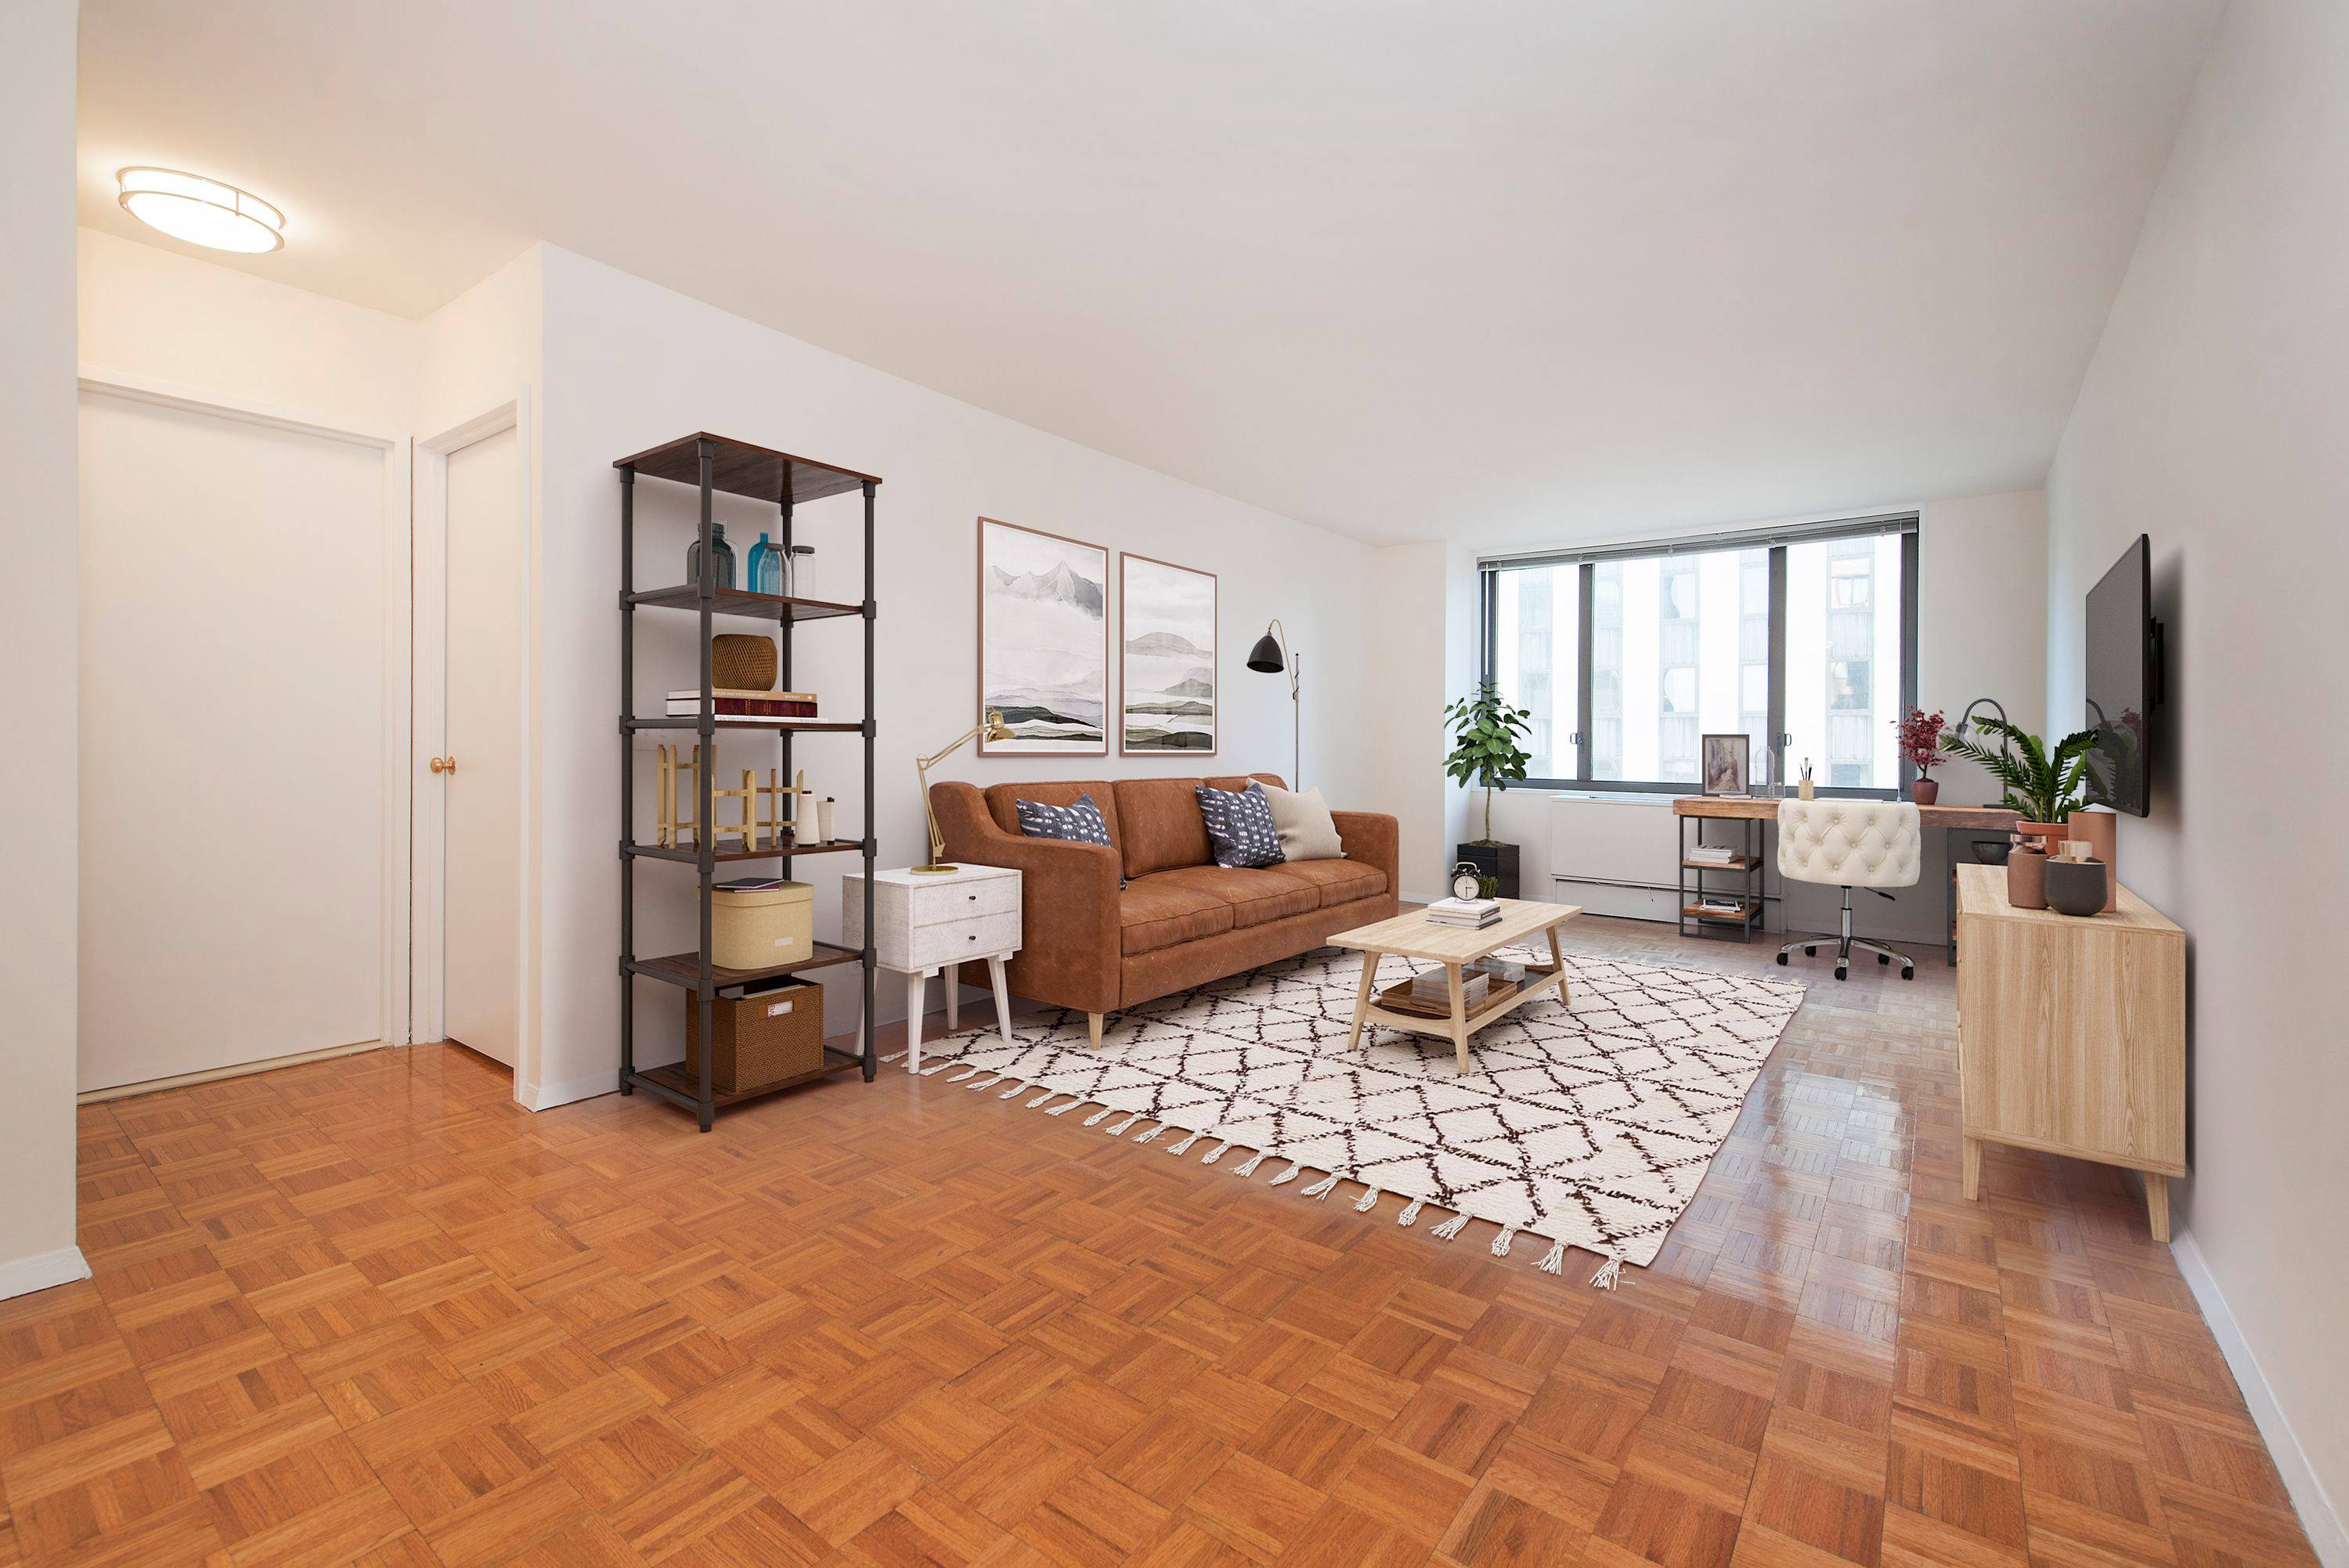 Located at 211 West 56th Street, Carnegie Mews is in the center of New York's premiere neighborhood for entertainment and the Arts just steps from Carnegie Hall, Lincoln Center, the ...